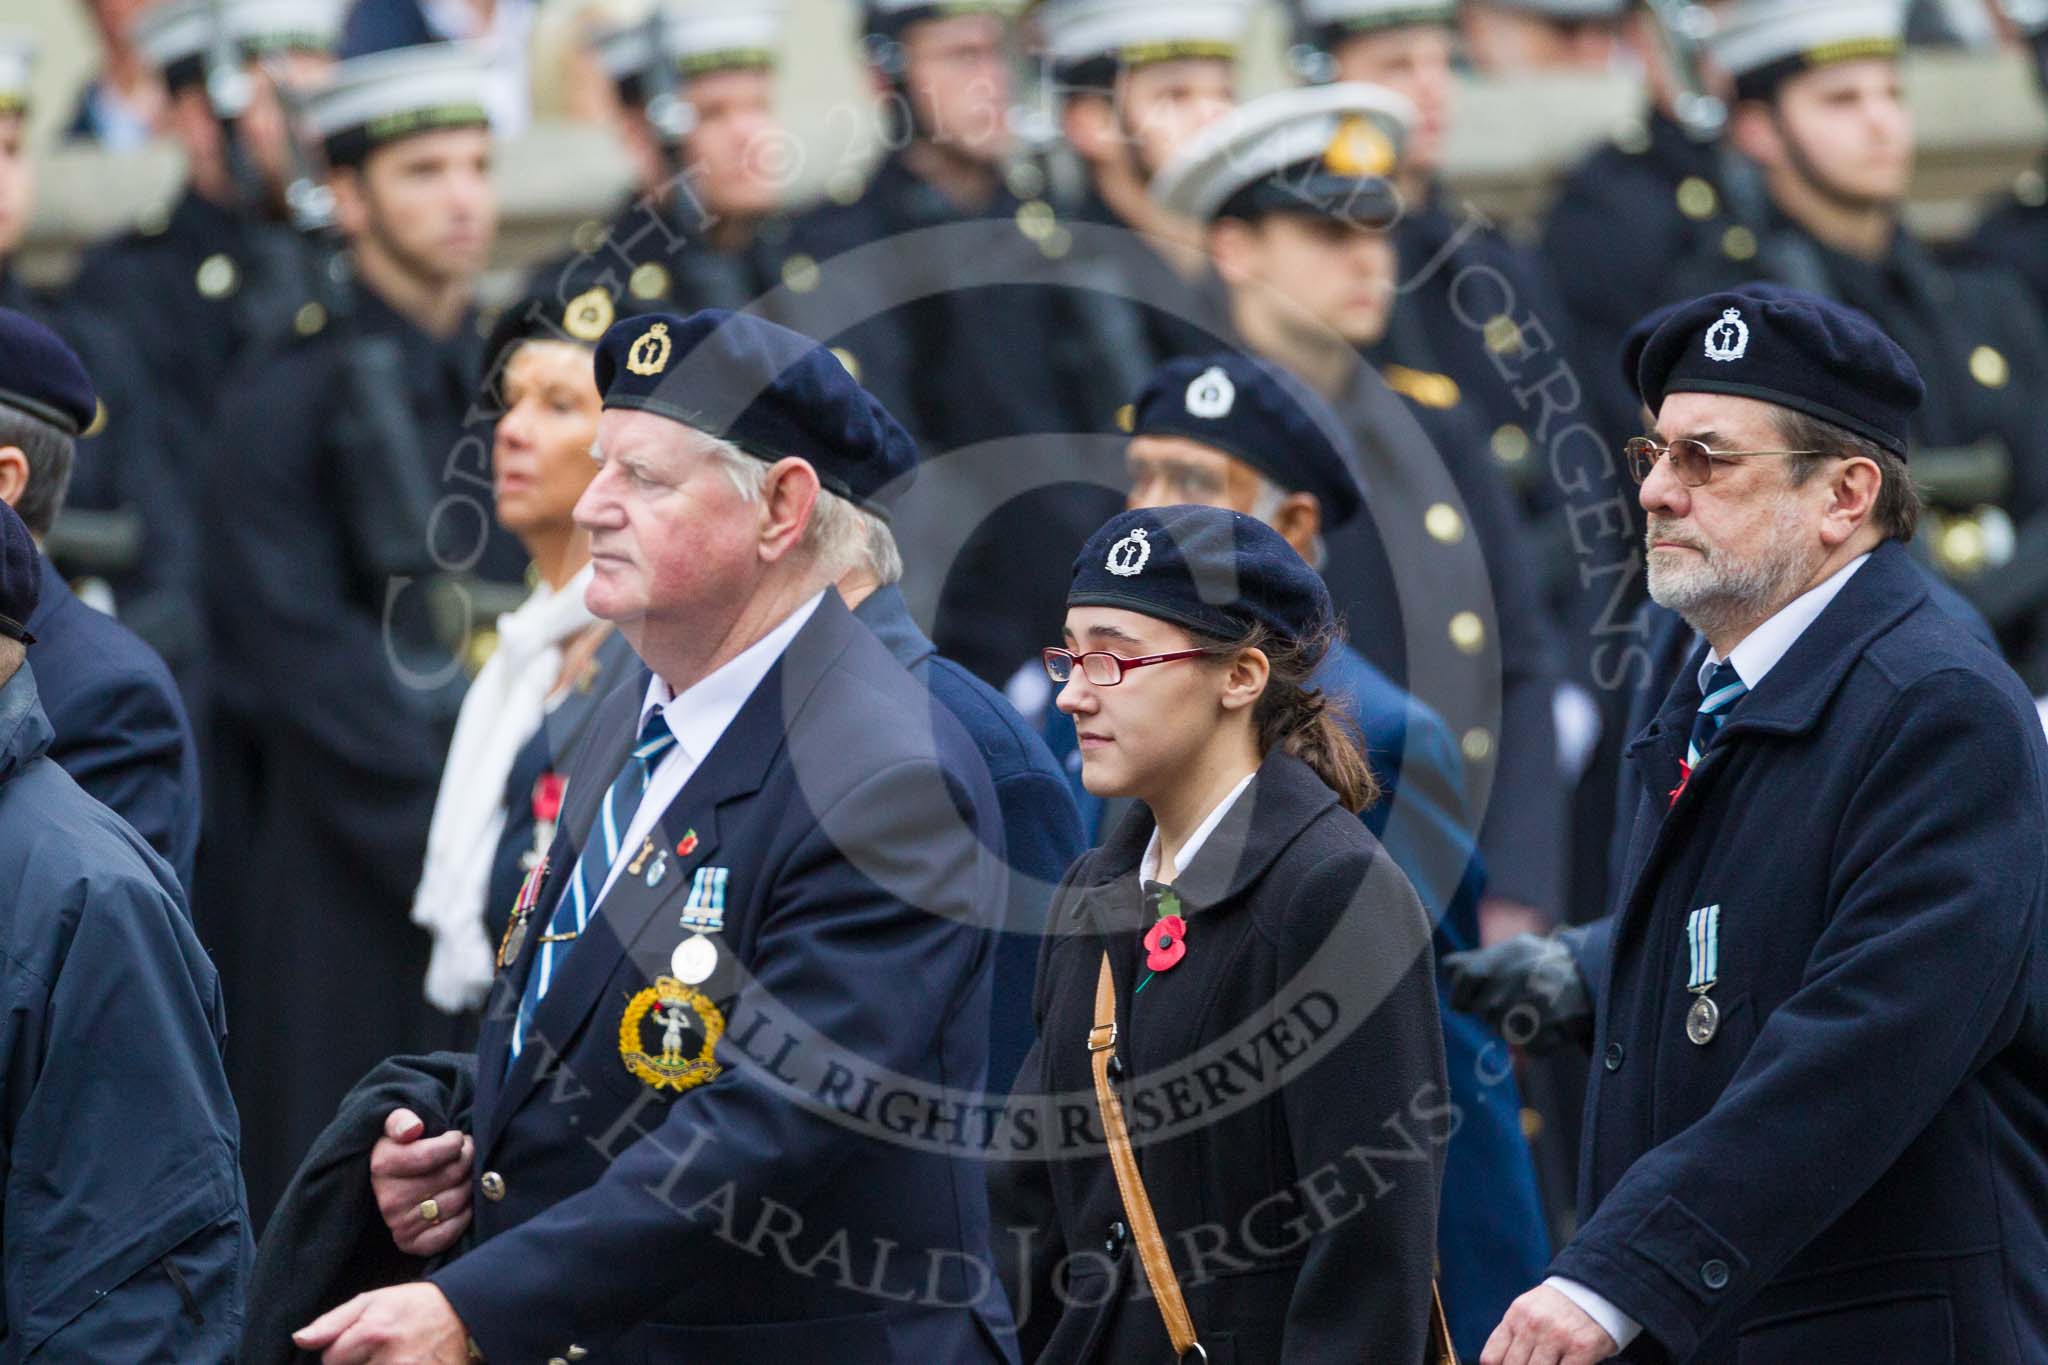 Remembrance Sunday at the Cenotaph 2015: Group C4, Royal Observer Corps Association (Anniversary).
Cenotaph, Whitehall, London SW1,
London,
Greater London,
United Kingdom,
on 08 November 2015 at 11:48, image #452